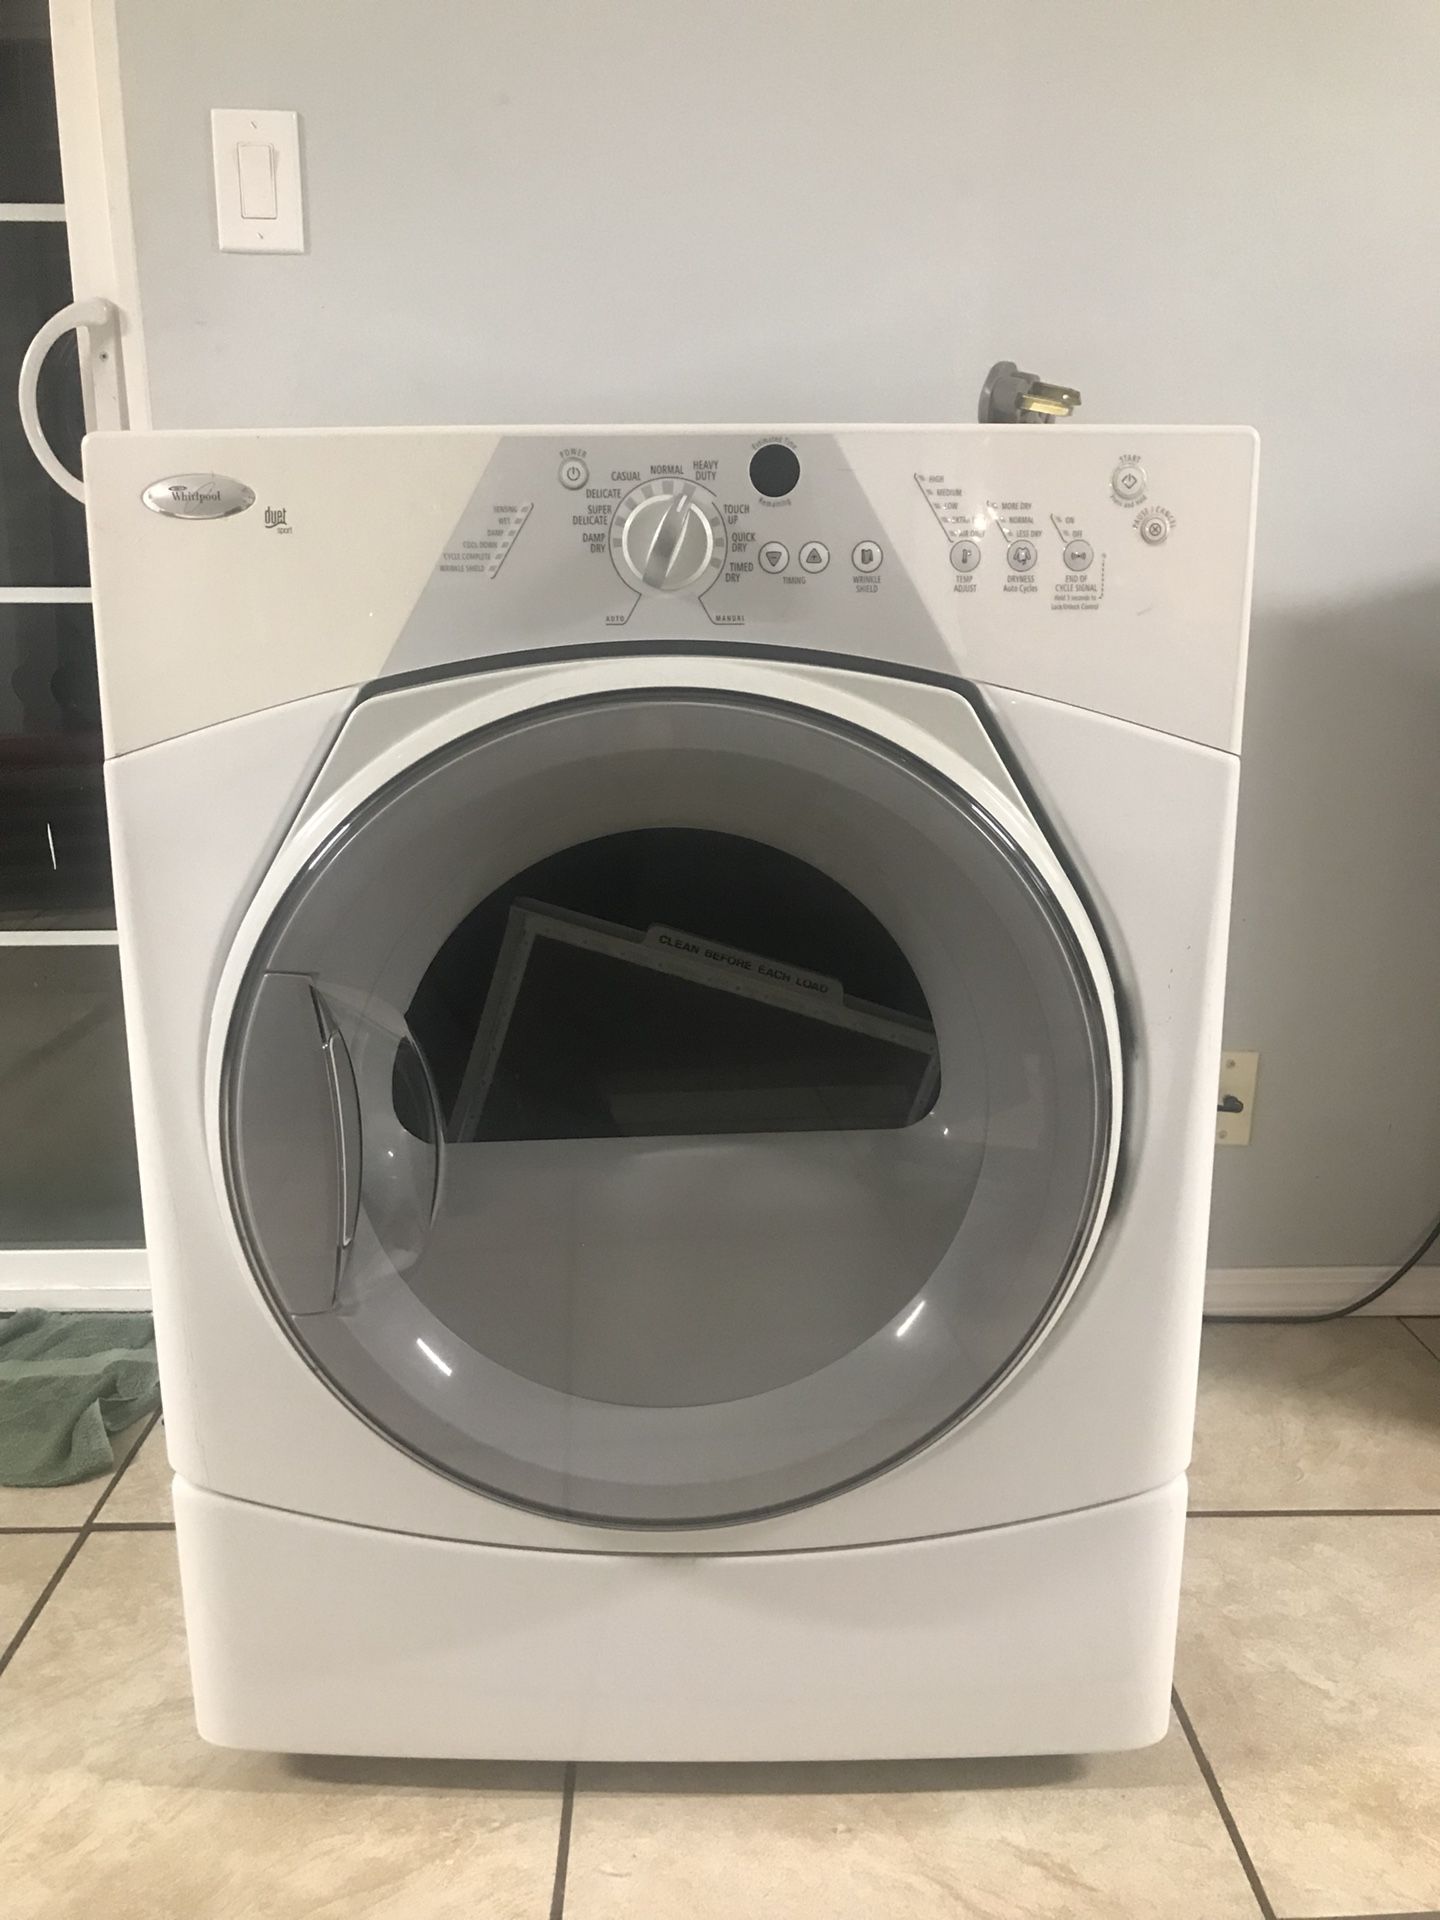 ELECTRIC DRYER - WHIRLPOOL $150 OBO! MAKE ME AN OFFER